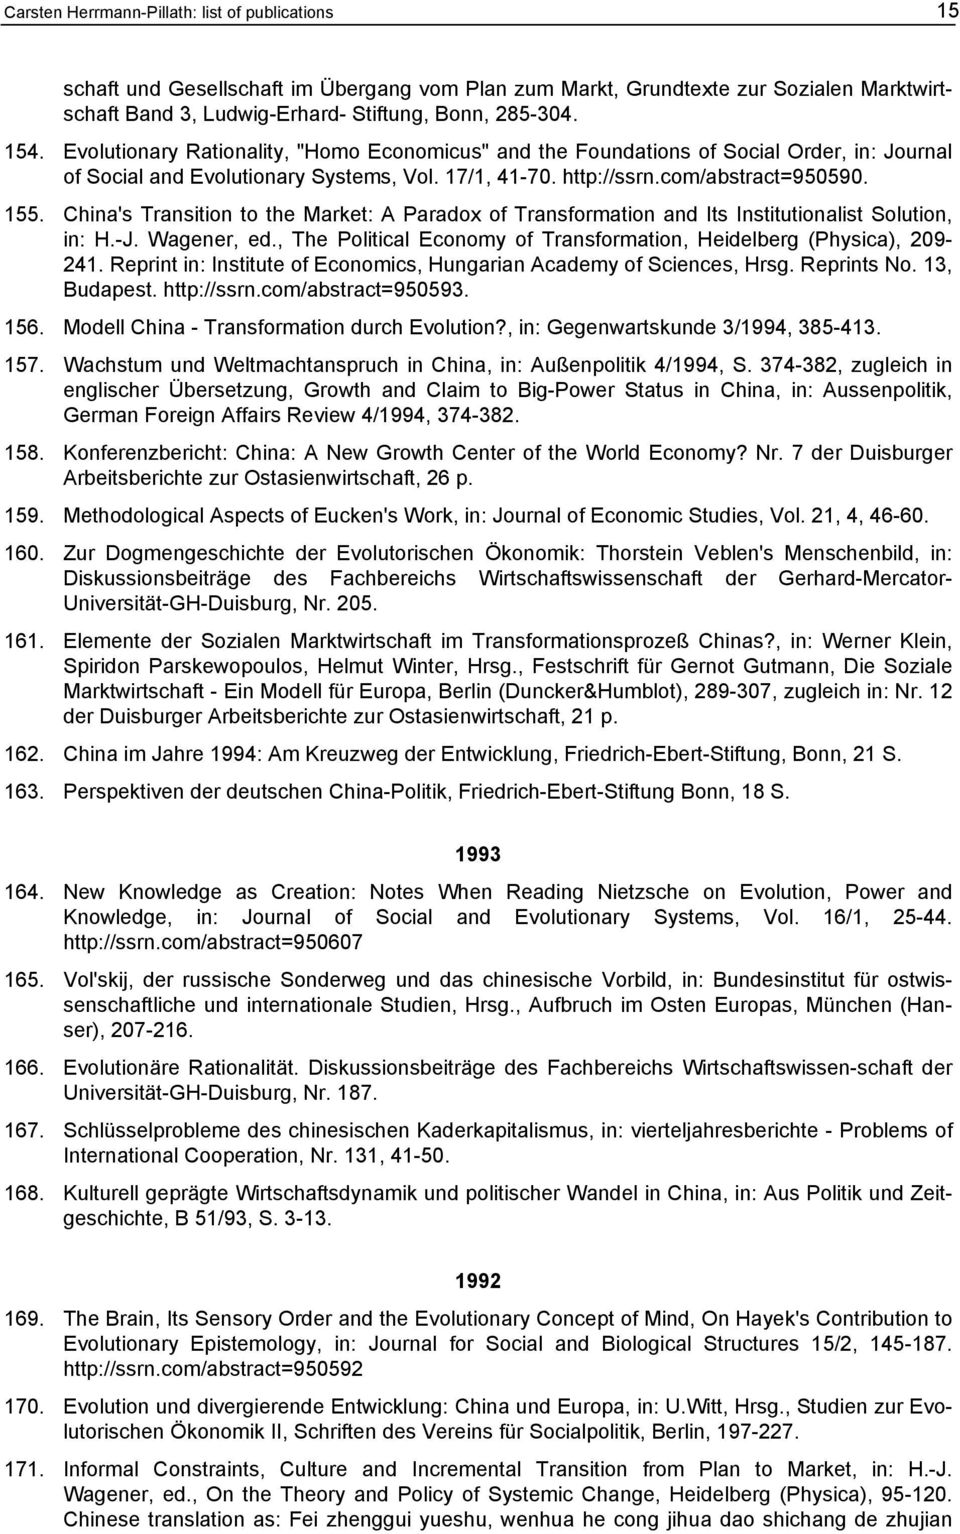 China's Transition to the Market: A Paradox of Transformation and Its Institutionalist Solution, in: H.-J. Wagener, ed., The Political Economy of Transformation, Heidelberg (Physica), 209-241.